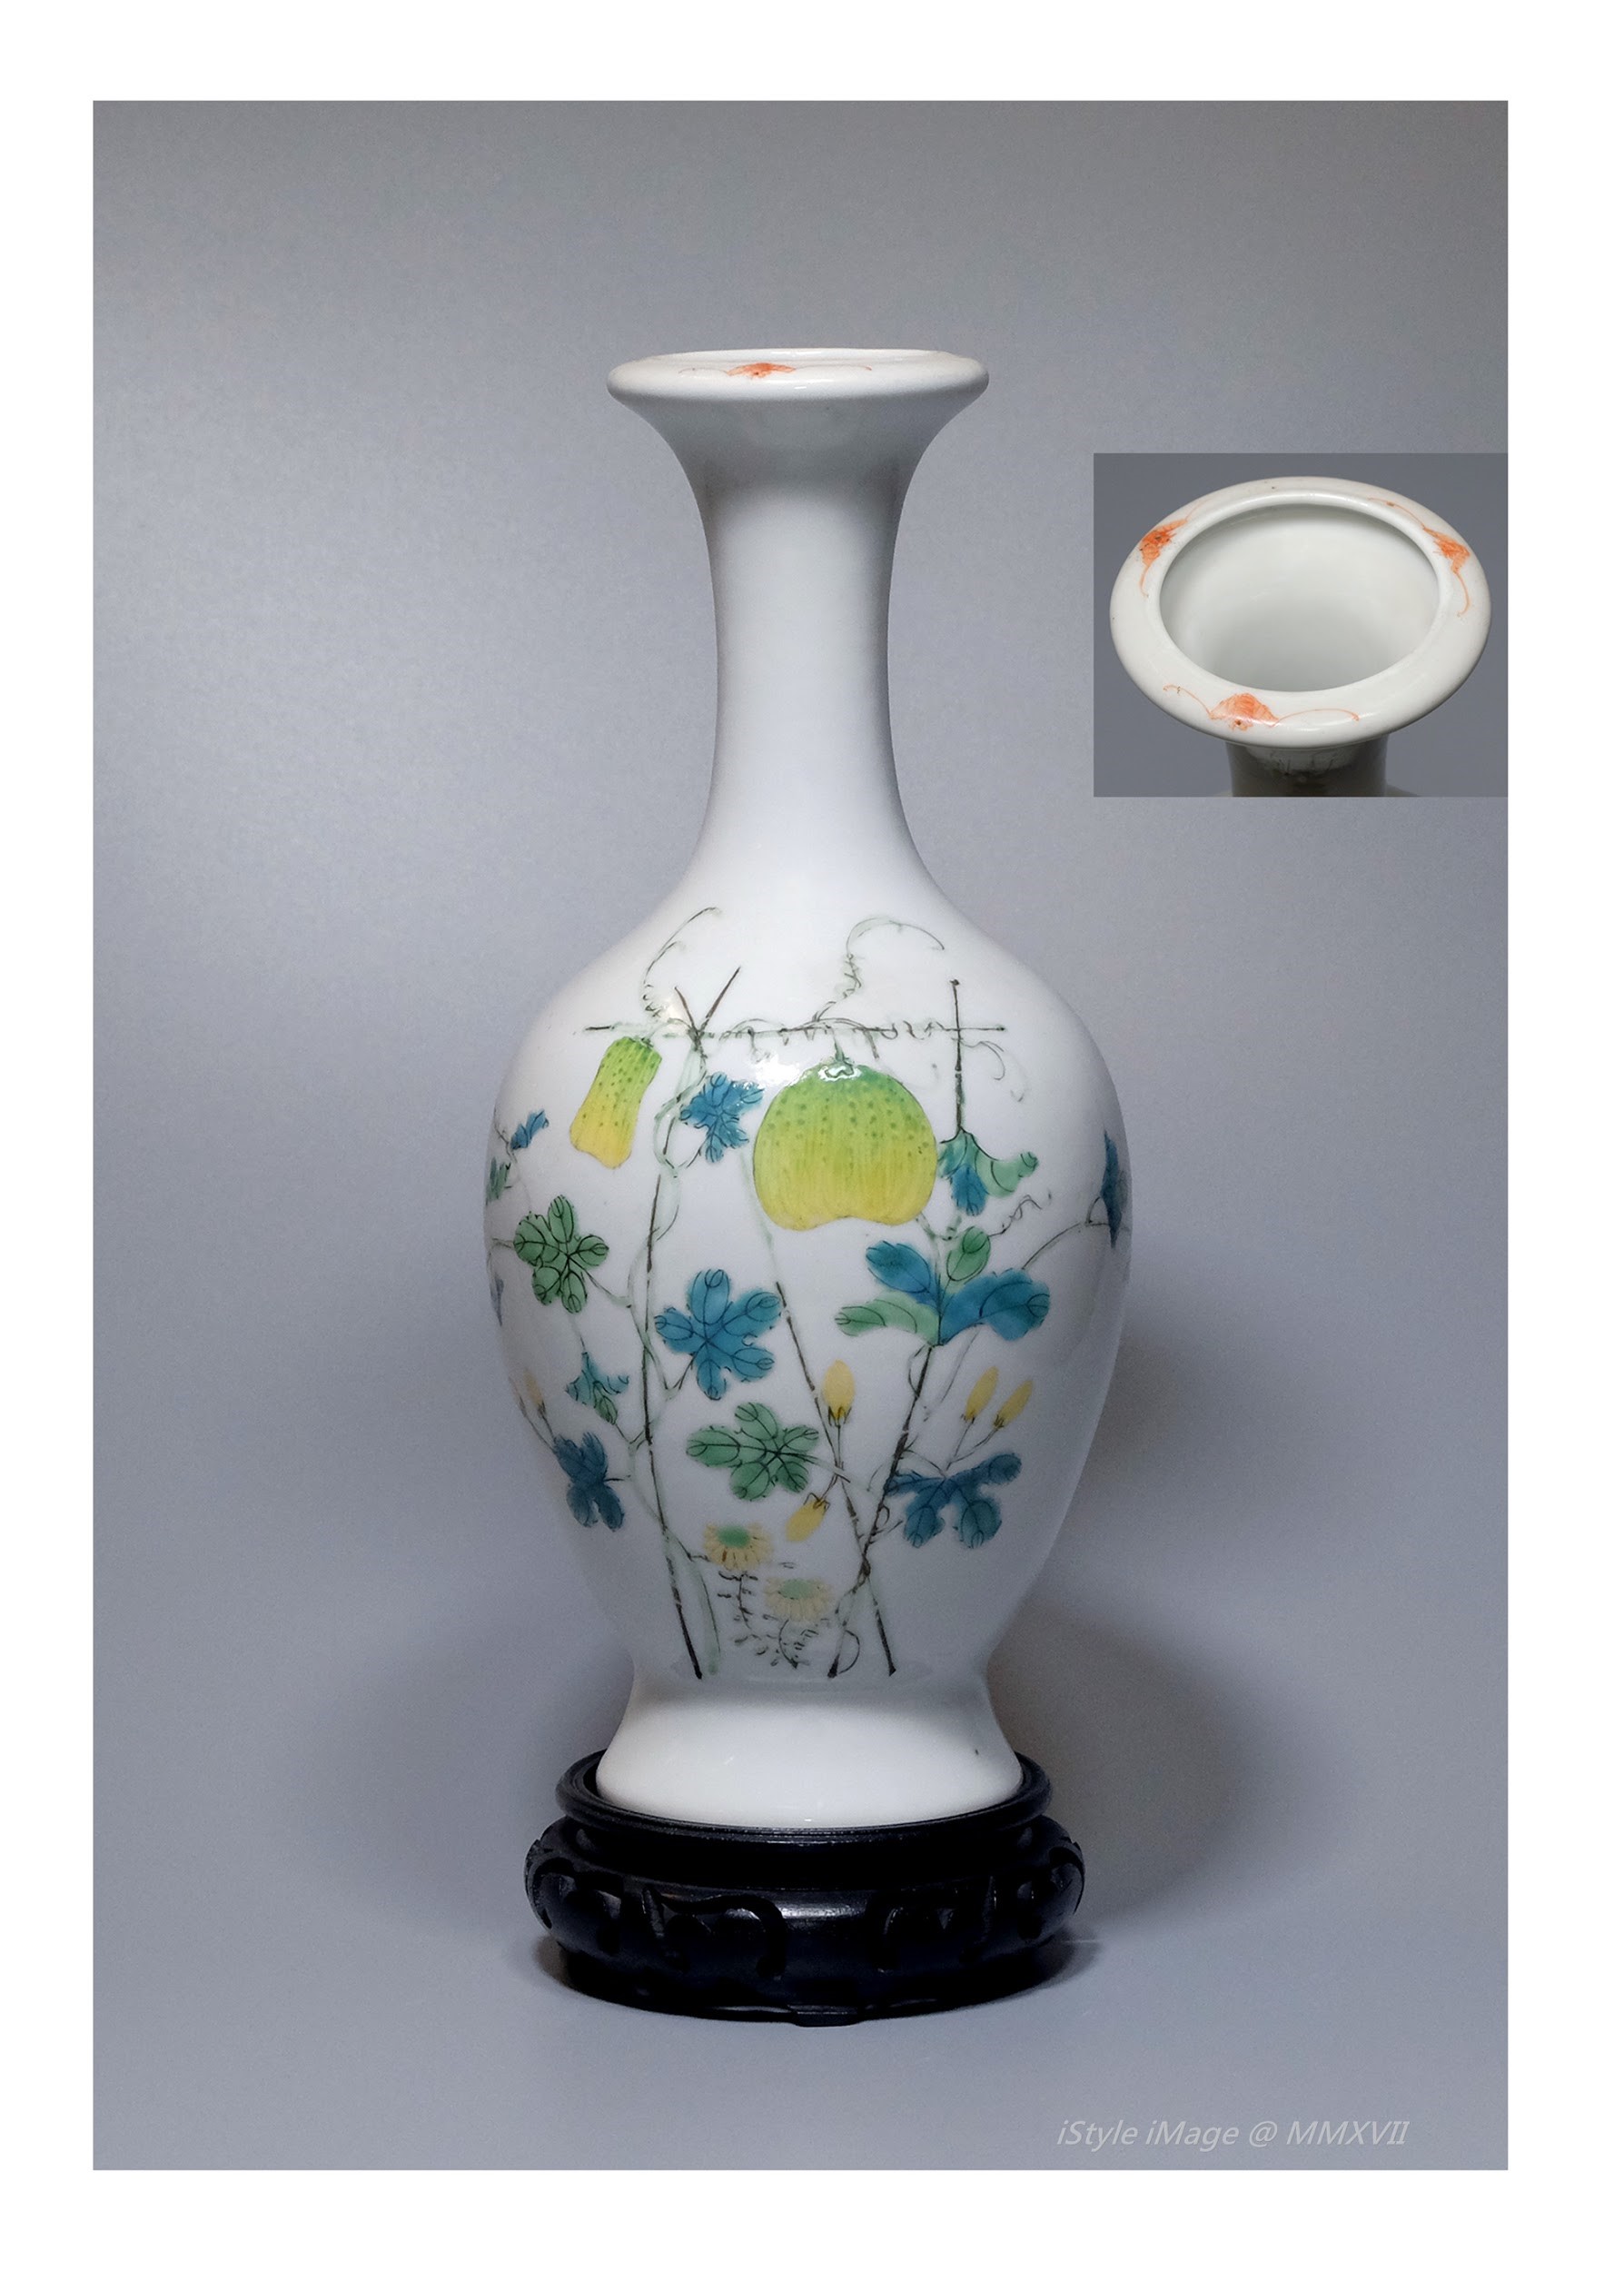 <br><h4>Lot 4 : An exquisite elegance and finely potted body of elegant ovoid form famille-rose vase (with Qianlong marks but early Republic )</h4>
					A finely potted body of elegant ovoid form, supported on a splayed foot, painted with yellowish-green melons and floral bloom borne on a leafy branch, the everted rim painted in coral colour with three bats (Fu, means good fortune).  The base glazed inscribed with four character [Qianlong Nián zhì].
					<br>Measurements (H) high 25.50 CM,  (W)width 10.40 CM<br><br><br>精緻優雅的卵形粉彩花瓶 [乾隆年製]款，但屬民國早期<br>一個精細優雅的卵形瓶身，支撐在一圈微斜的腳上，黃綠色的瓜和花朵綻放在一個枝繁葉茂的分支上，外翻的邊緣上有三隻珊瑚色的蝙蝠（福，意味著好運）。  底款[乾隆年製]<br>尺寸(H)高 25.5 厘米,  (W)濶10.4 厘米